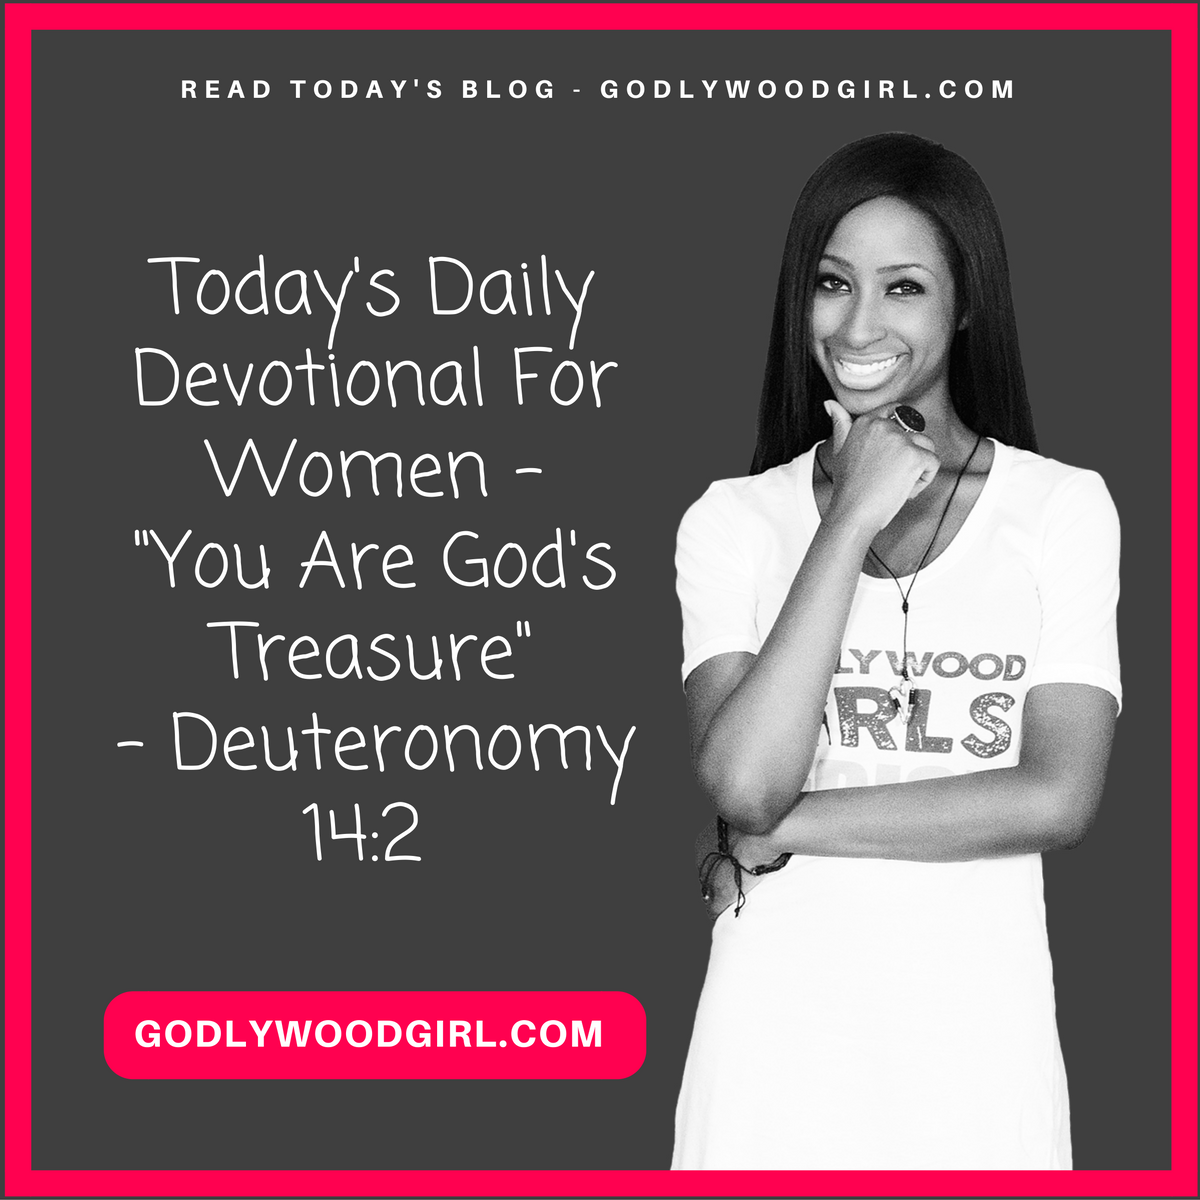 Today's Daily Devotional For Women - You Are God's Treasure